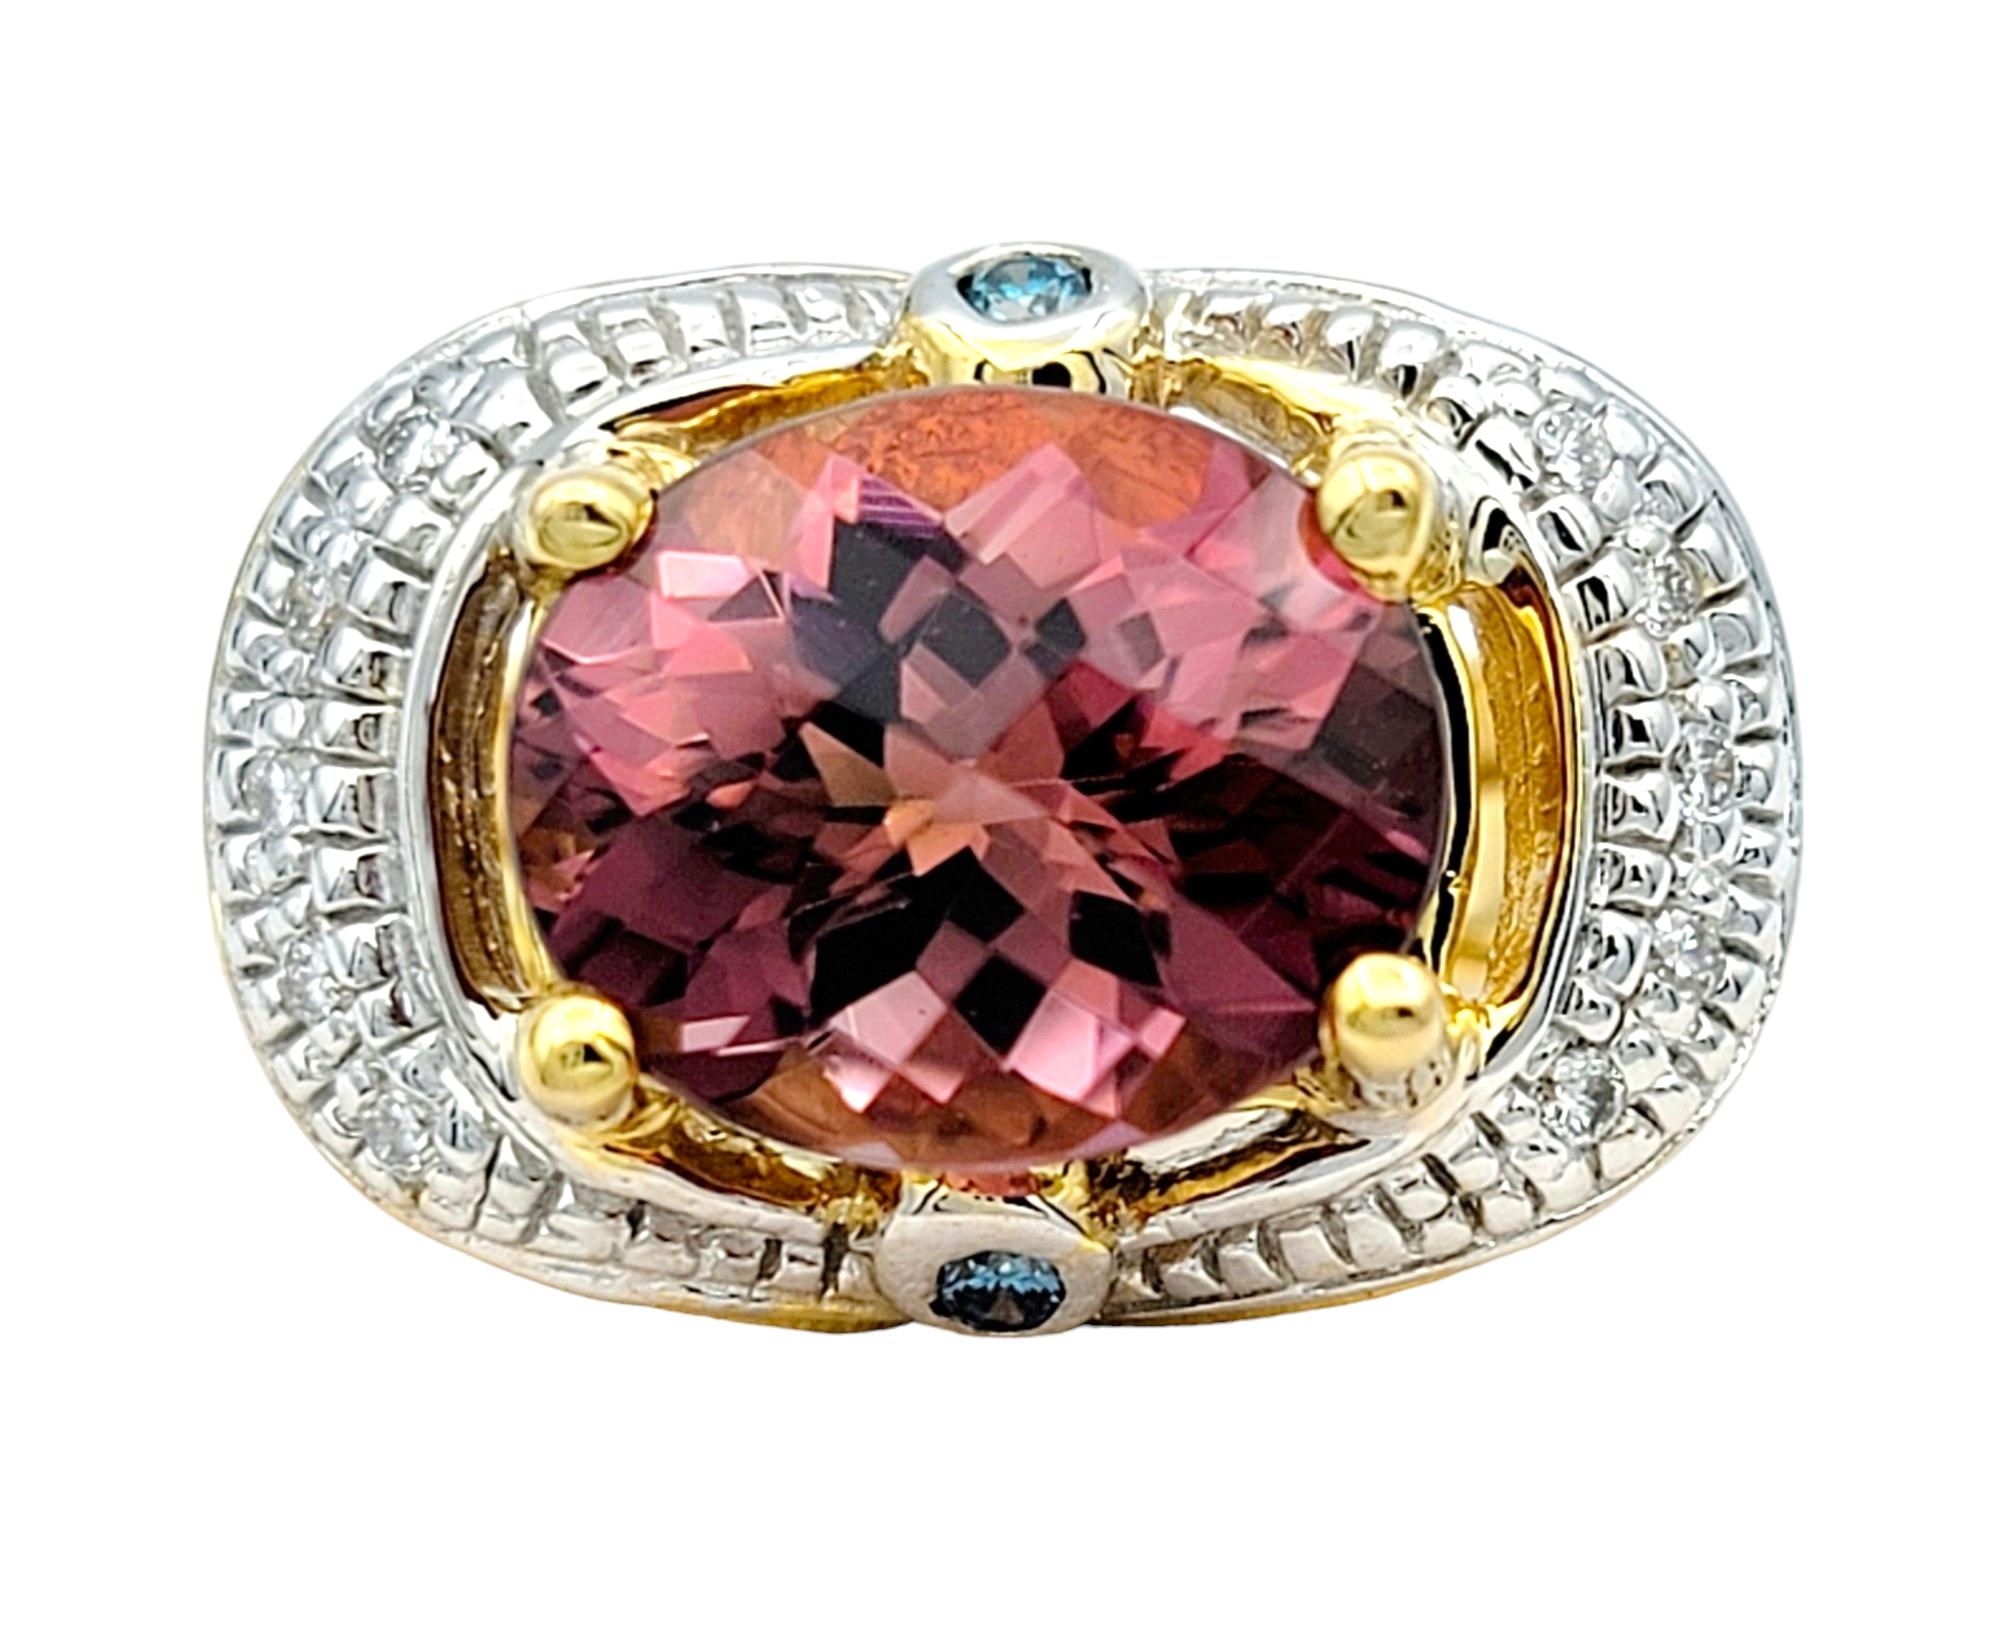 Ring Size: 4.75

Exuding a captivating allure, this cocktail ring features a splendid oval pink tourmaline as its focal point, embraced by a shimmering halo of diamonds. Set in 14 karat gold, the prongs cradling the tourmaline and the band showcase